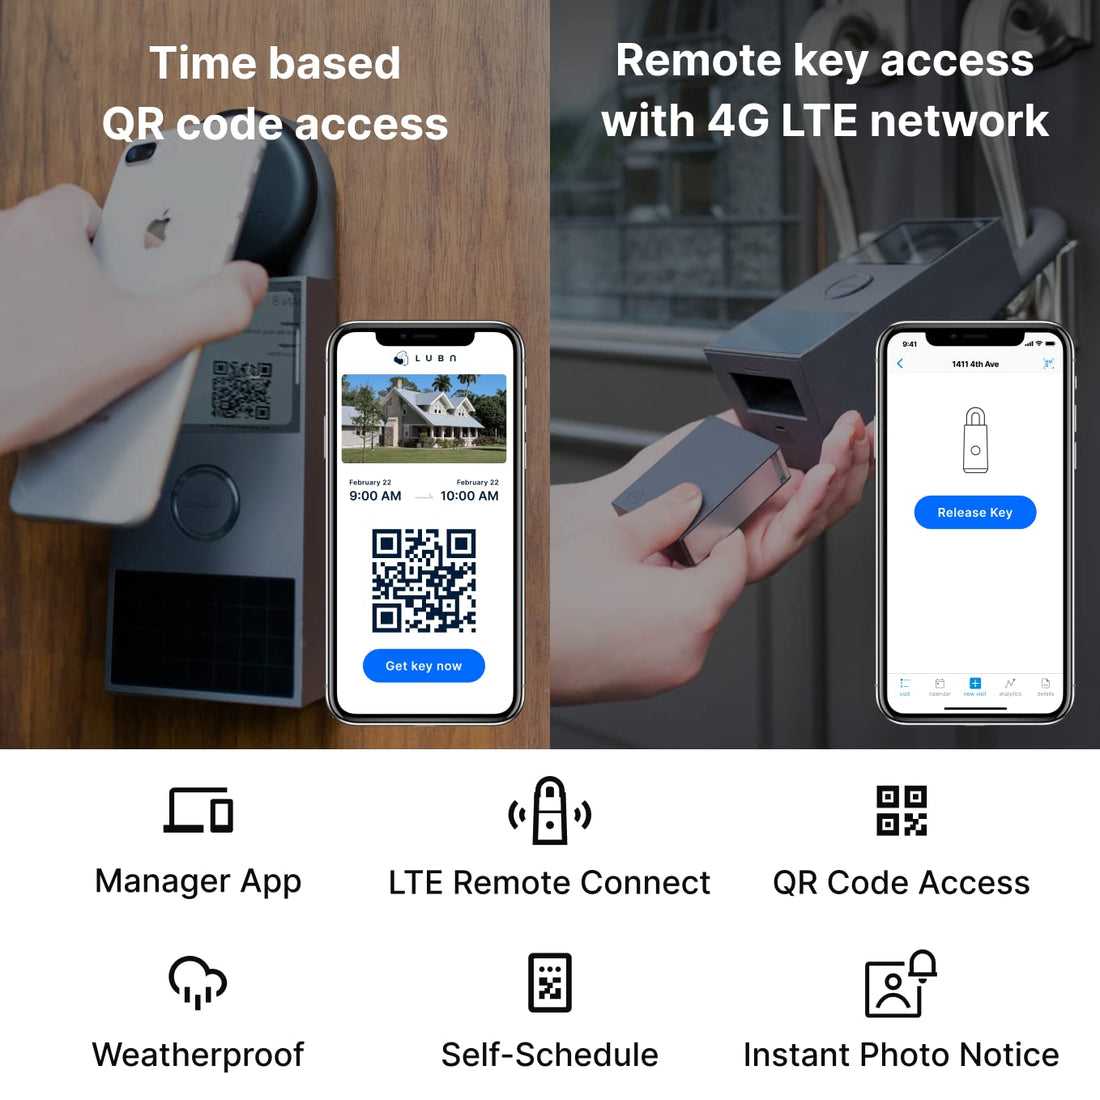 Lubn LTE Smart Camera Key Lock Box, Remote APP Key Box with QR Code Secure Access, Durable Outdoor Weatherproof Portable Digital Key Safe, Instant Visitor Check-in Photo Notice(Free 3 Month LTE Data)